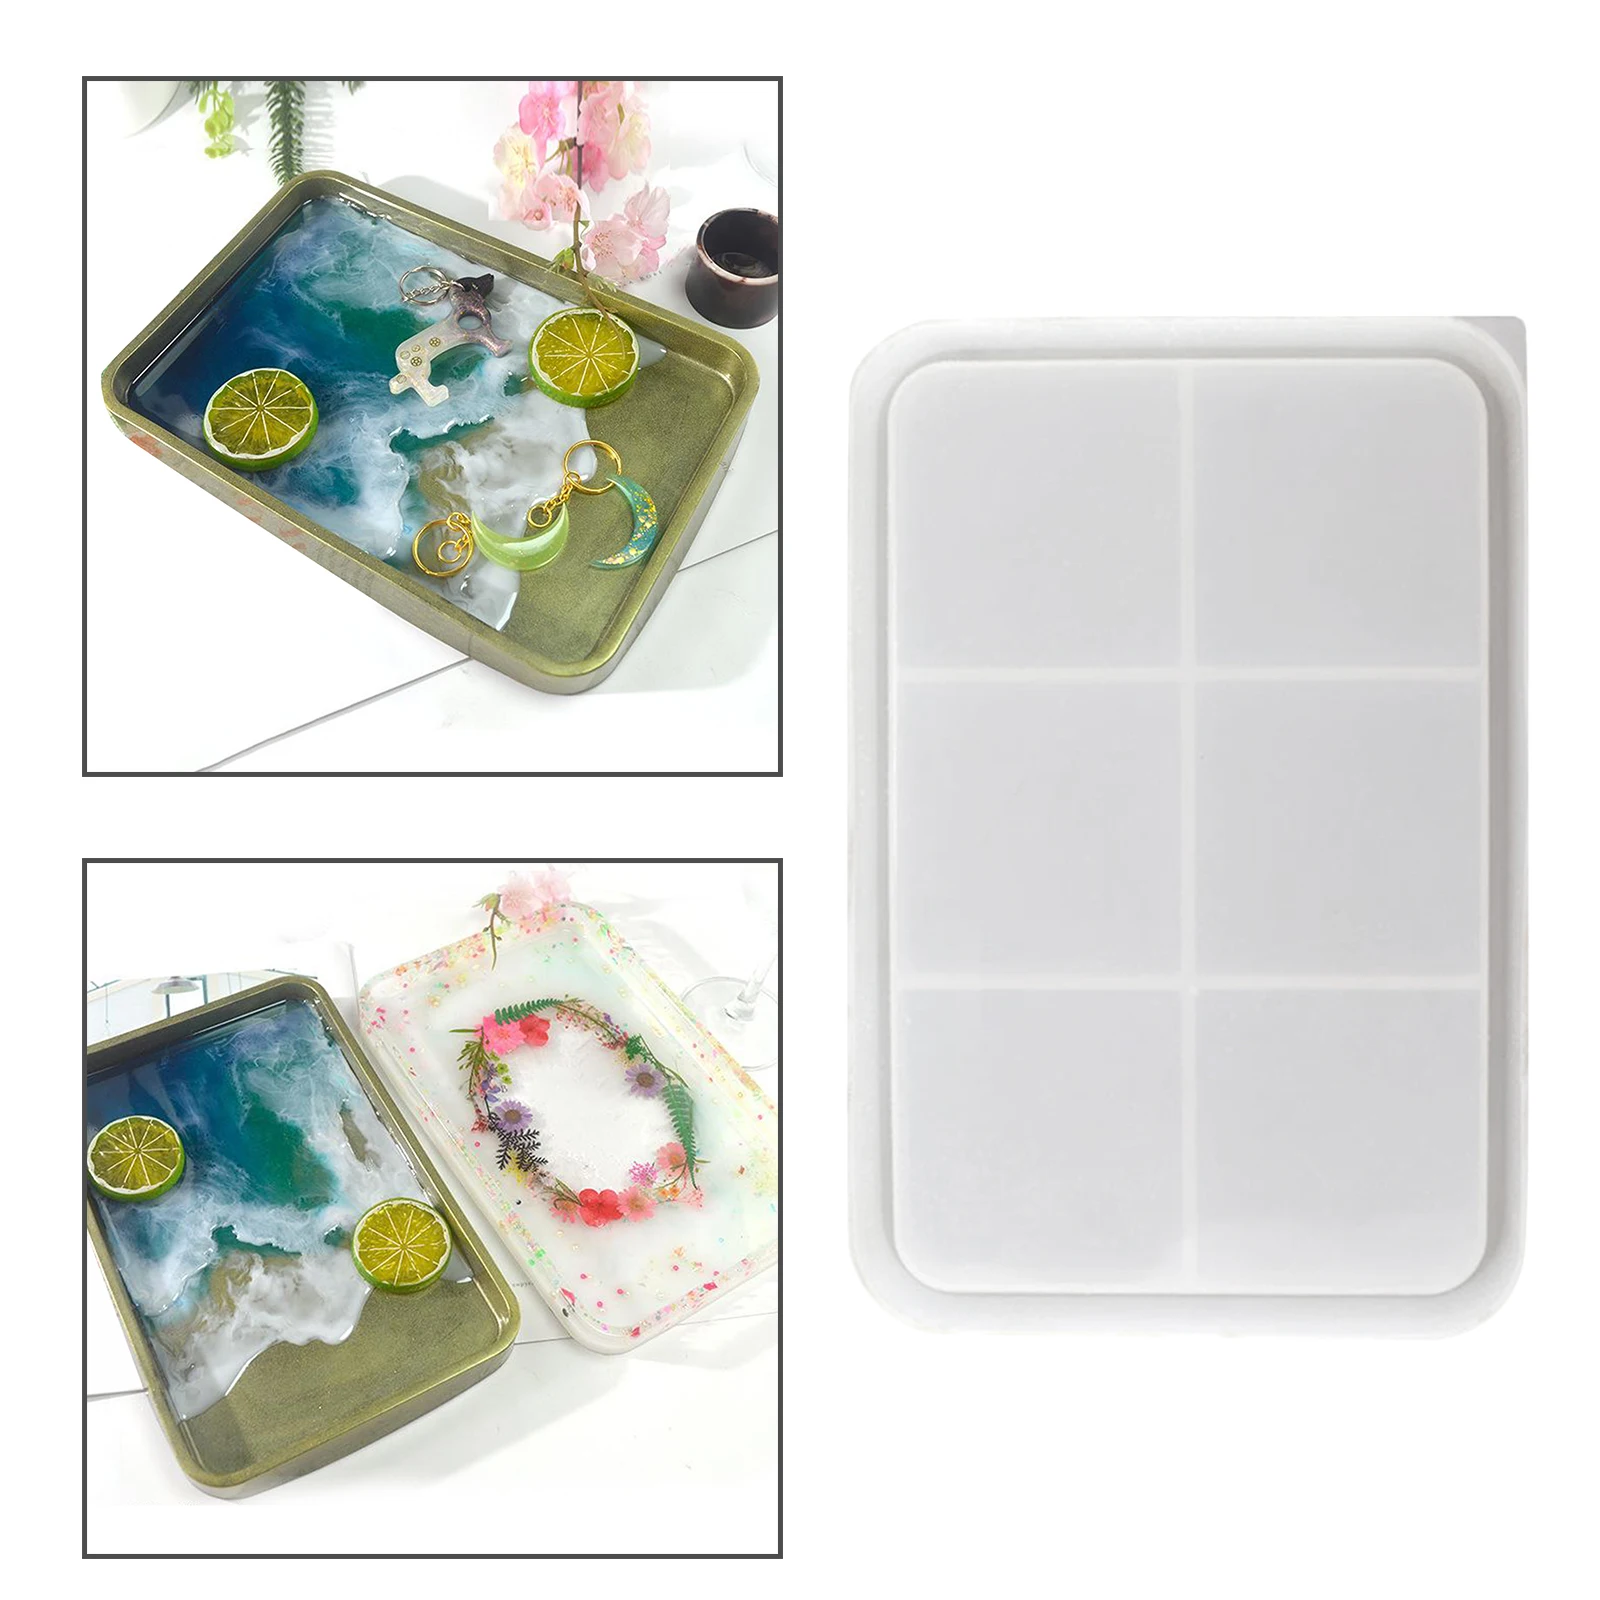 2 Tiers Fruit Tray Fruit Dish Tea Tray Silicone Mould with Tray Stand DIY Coaster Epoxy Crystal Resin Casting Mold for Cupcakes Fruits Dessert Home Decoration Craft 